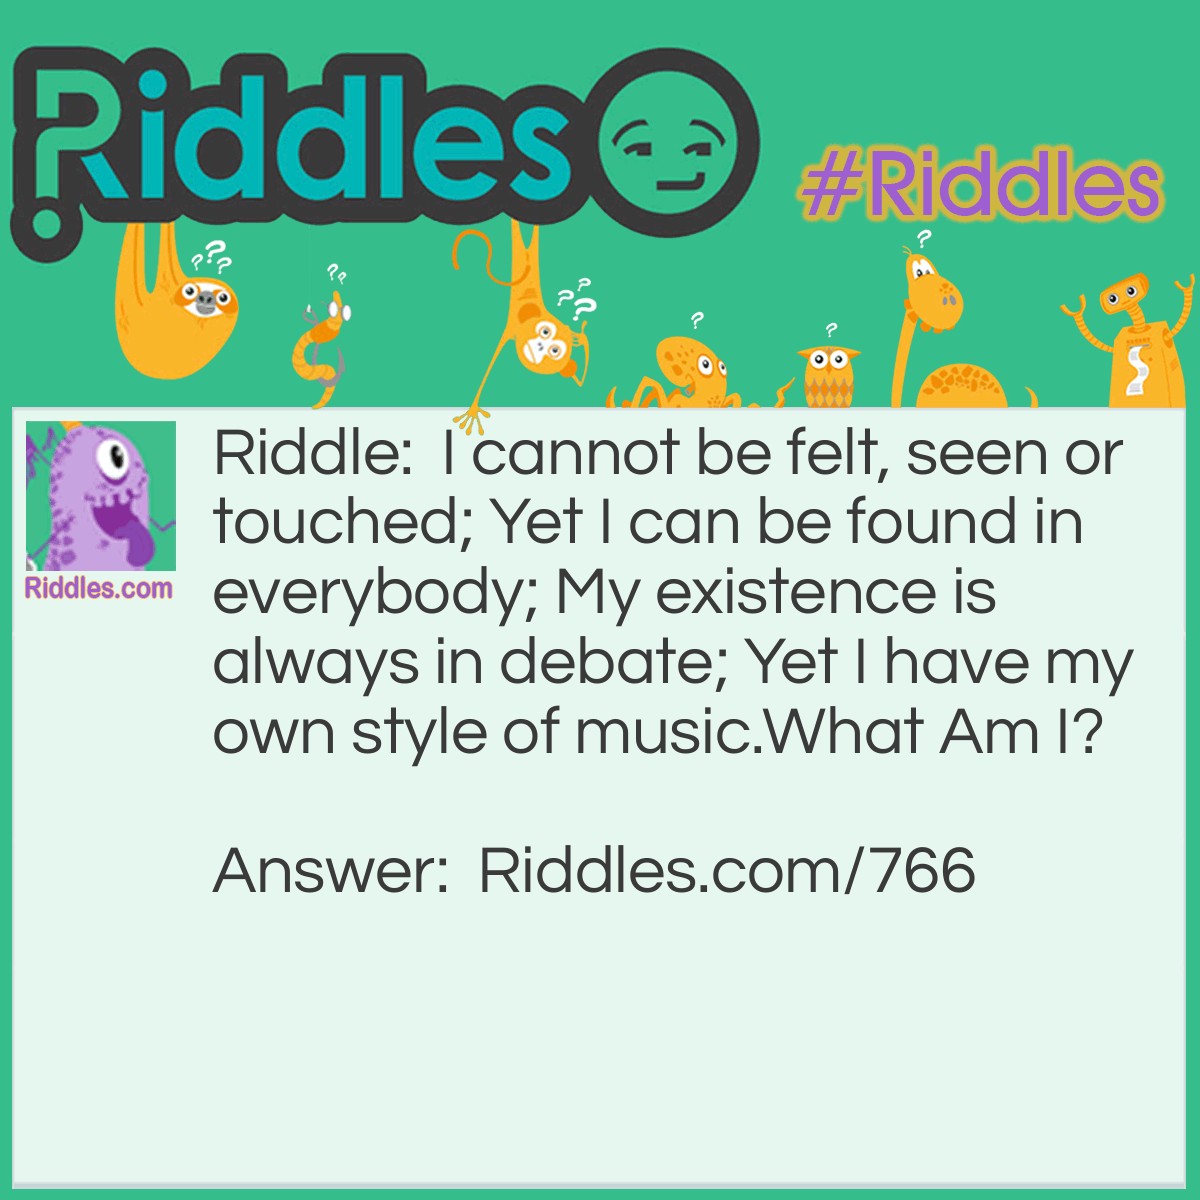 Riddle: I cannot be felt, seen or touched; Yet I can be found in everybody; My existence is always in debate; Yet I have my own style of music.
What Am I? Answer: I am a soul.